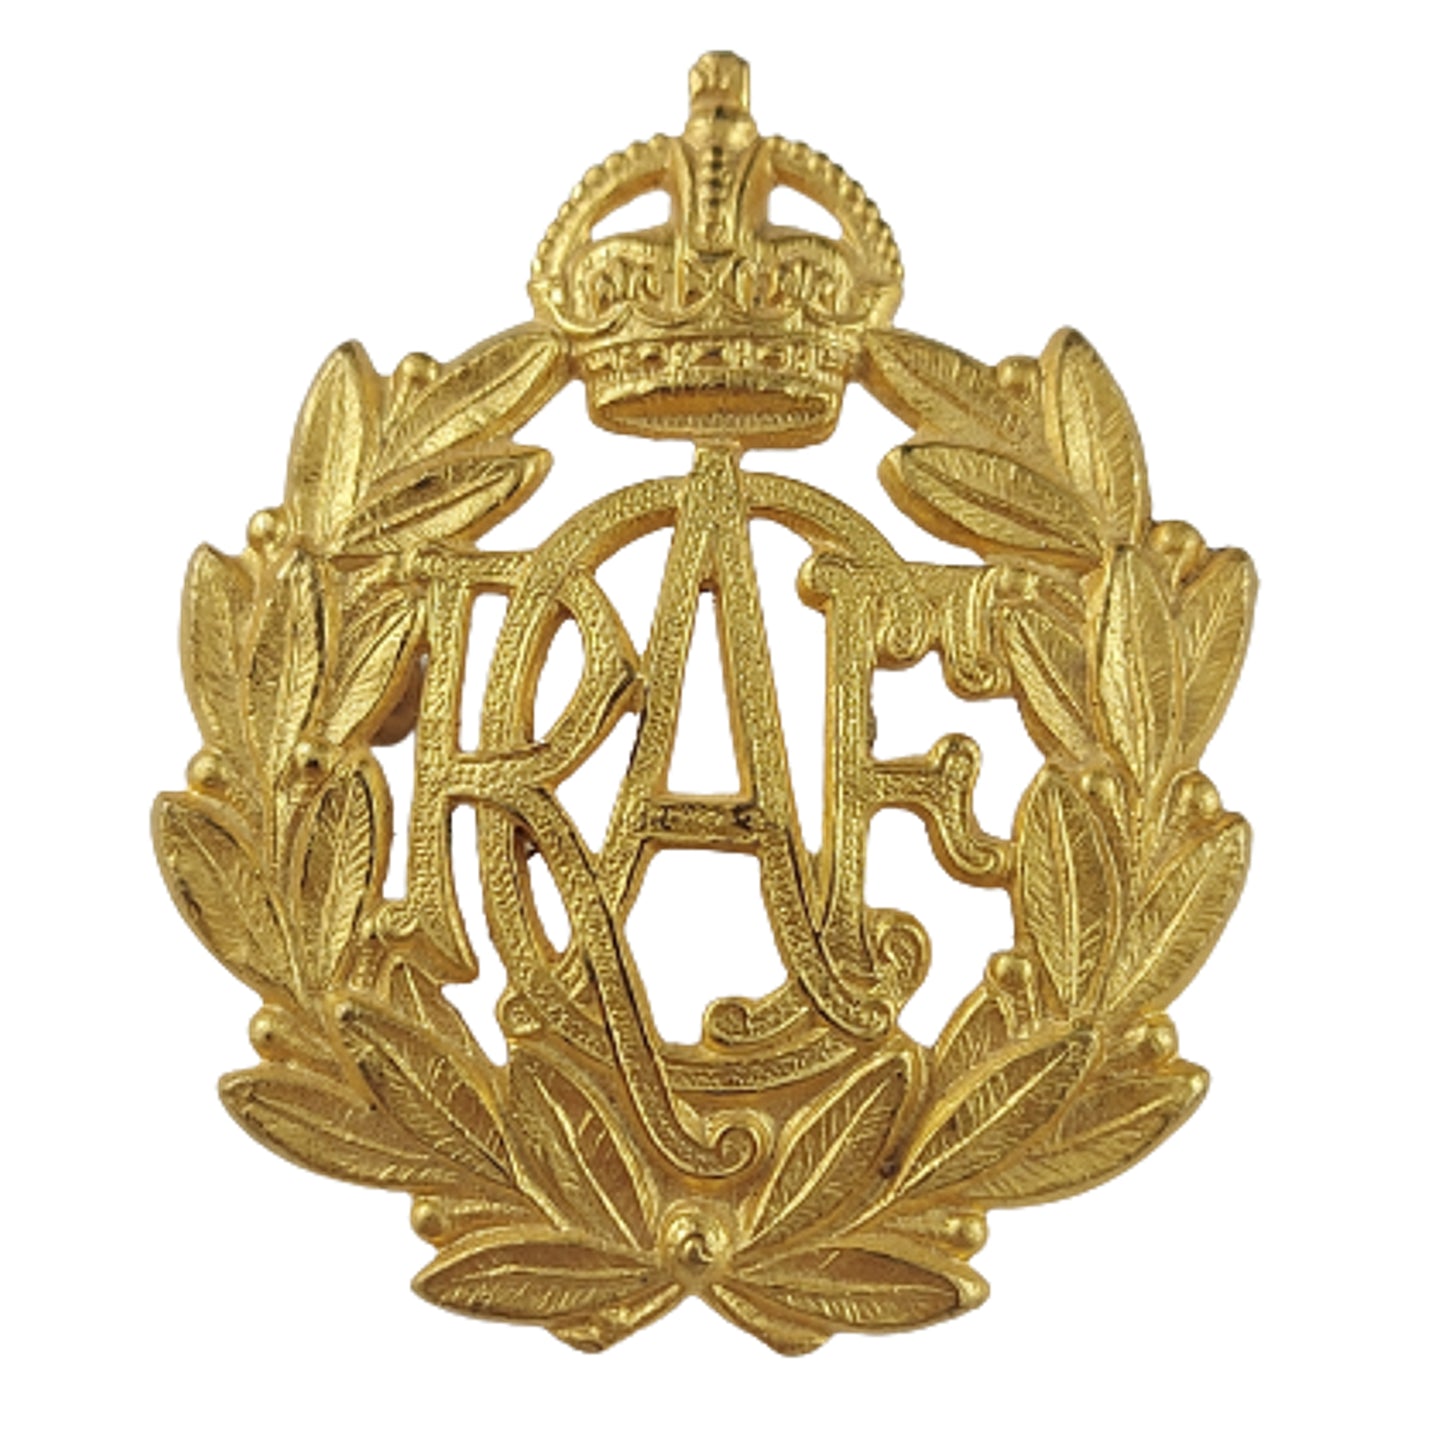 WW2 RCAF Royal Canadian Air Force Officer's Cap Badge - Scully Montrea ...